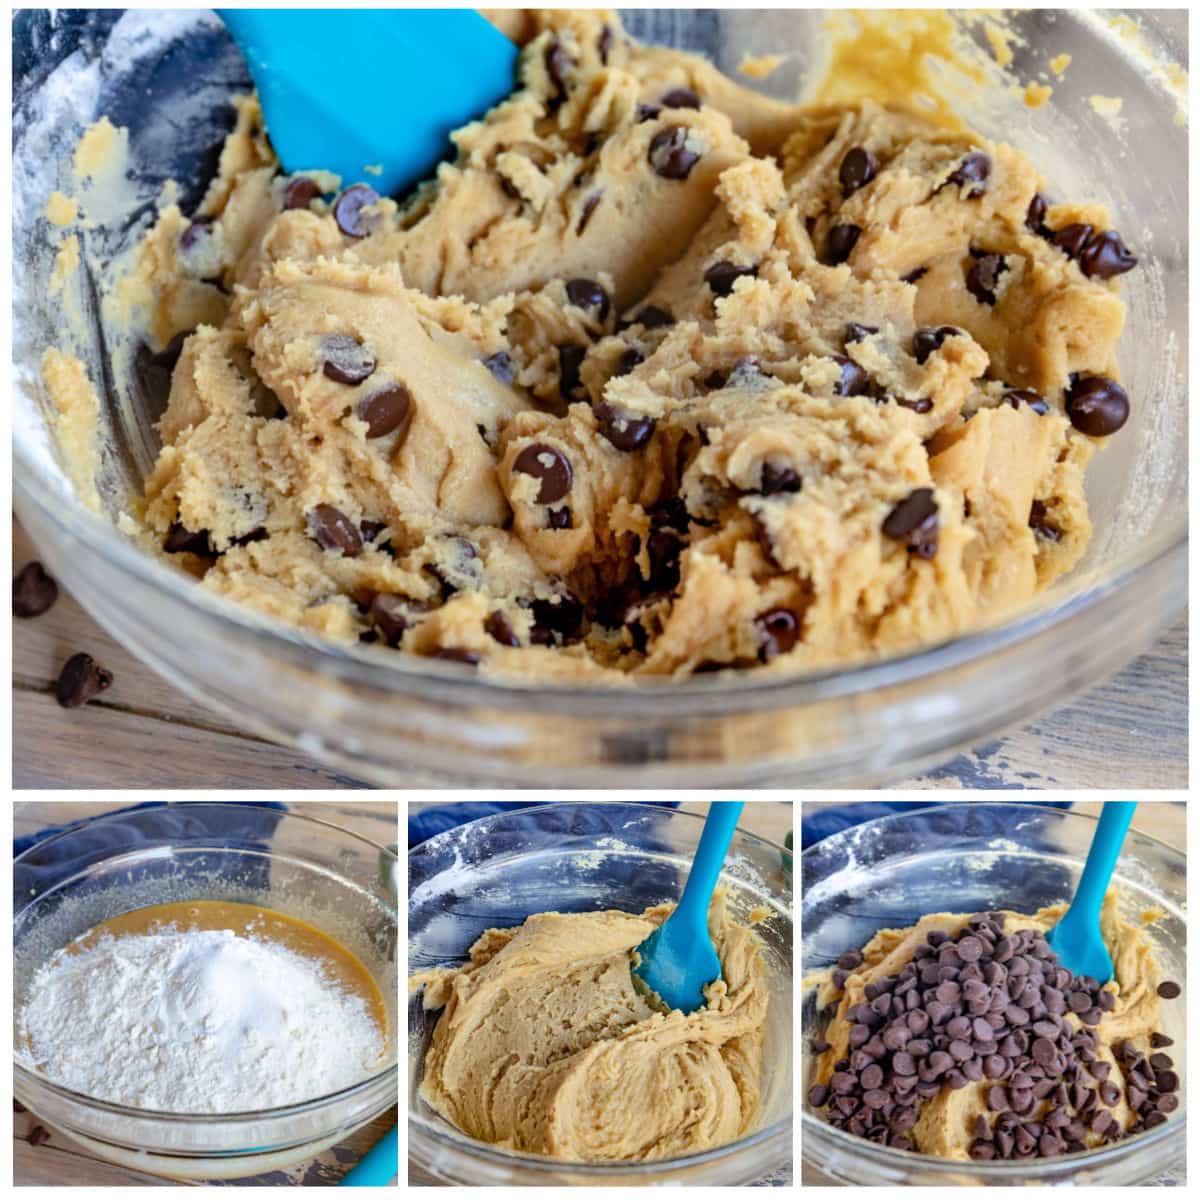 how to make chocolate chip cookies 4 image collage showing the cookie dough being made step by step